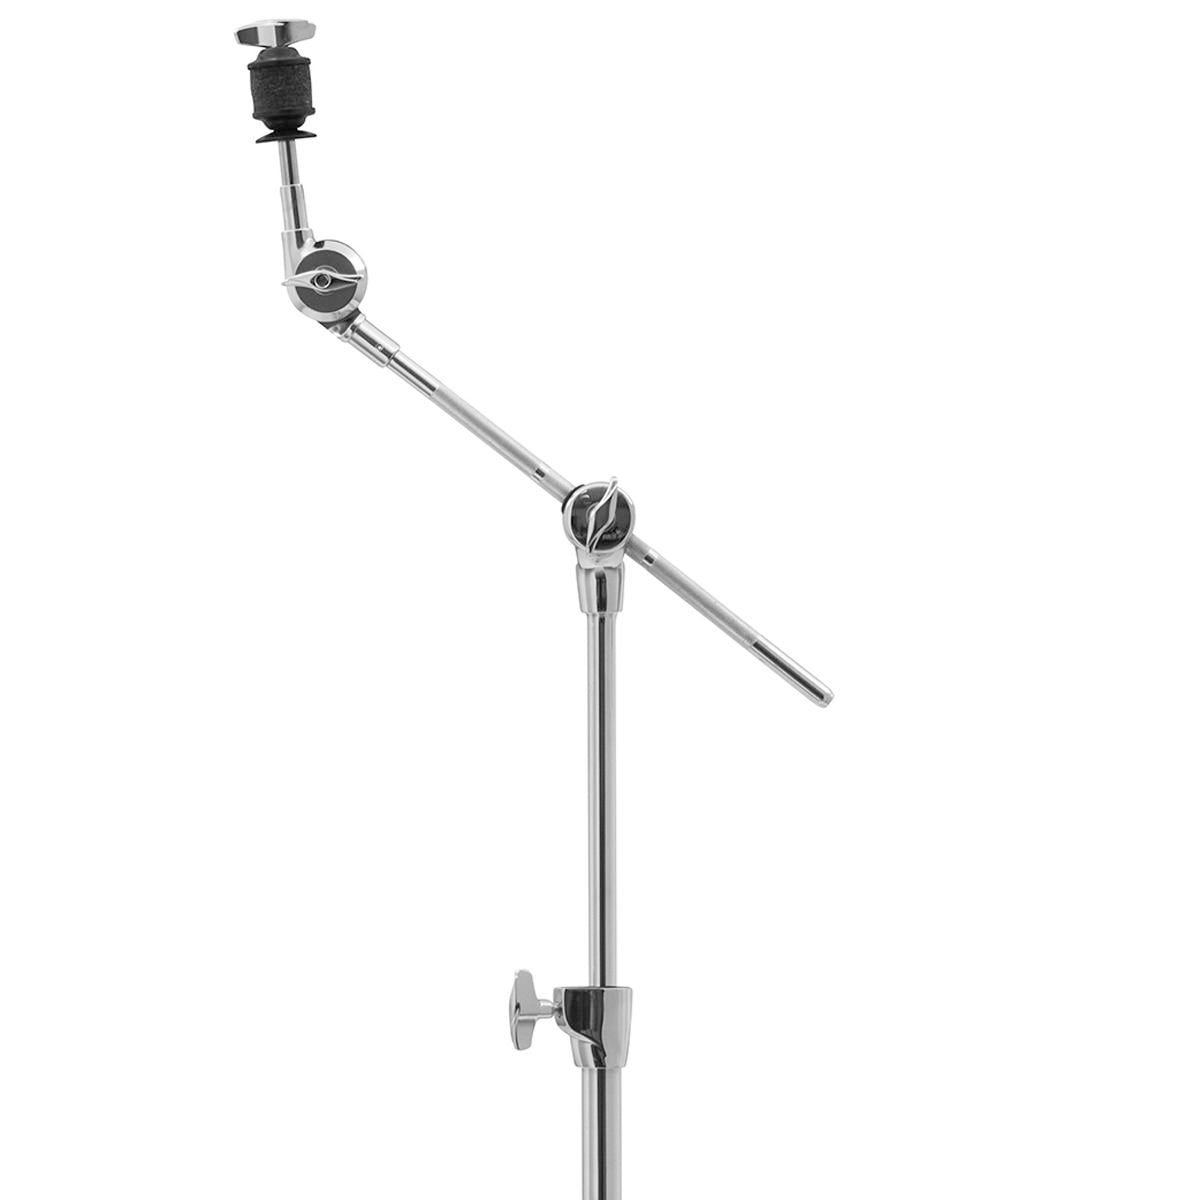 Mapex 600 Series Boom Stand in Chrome